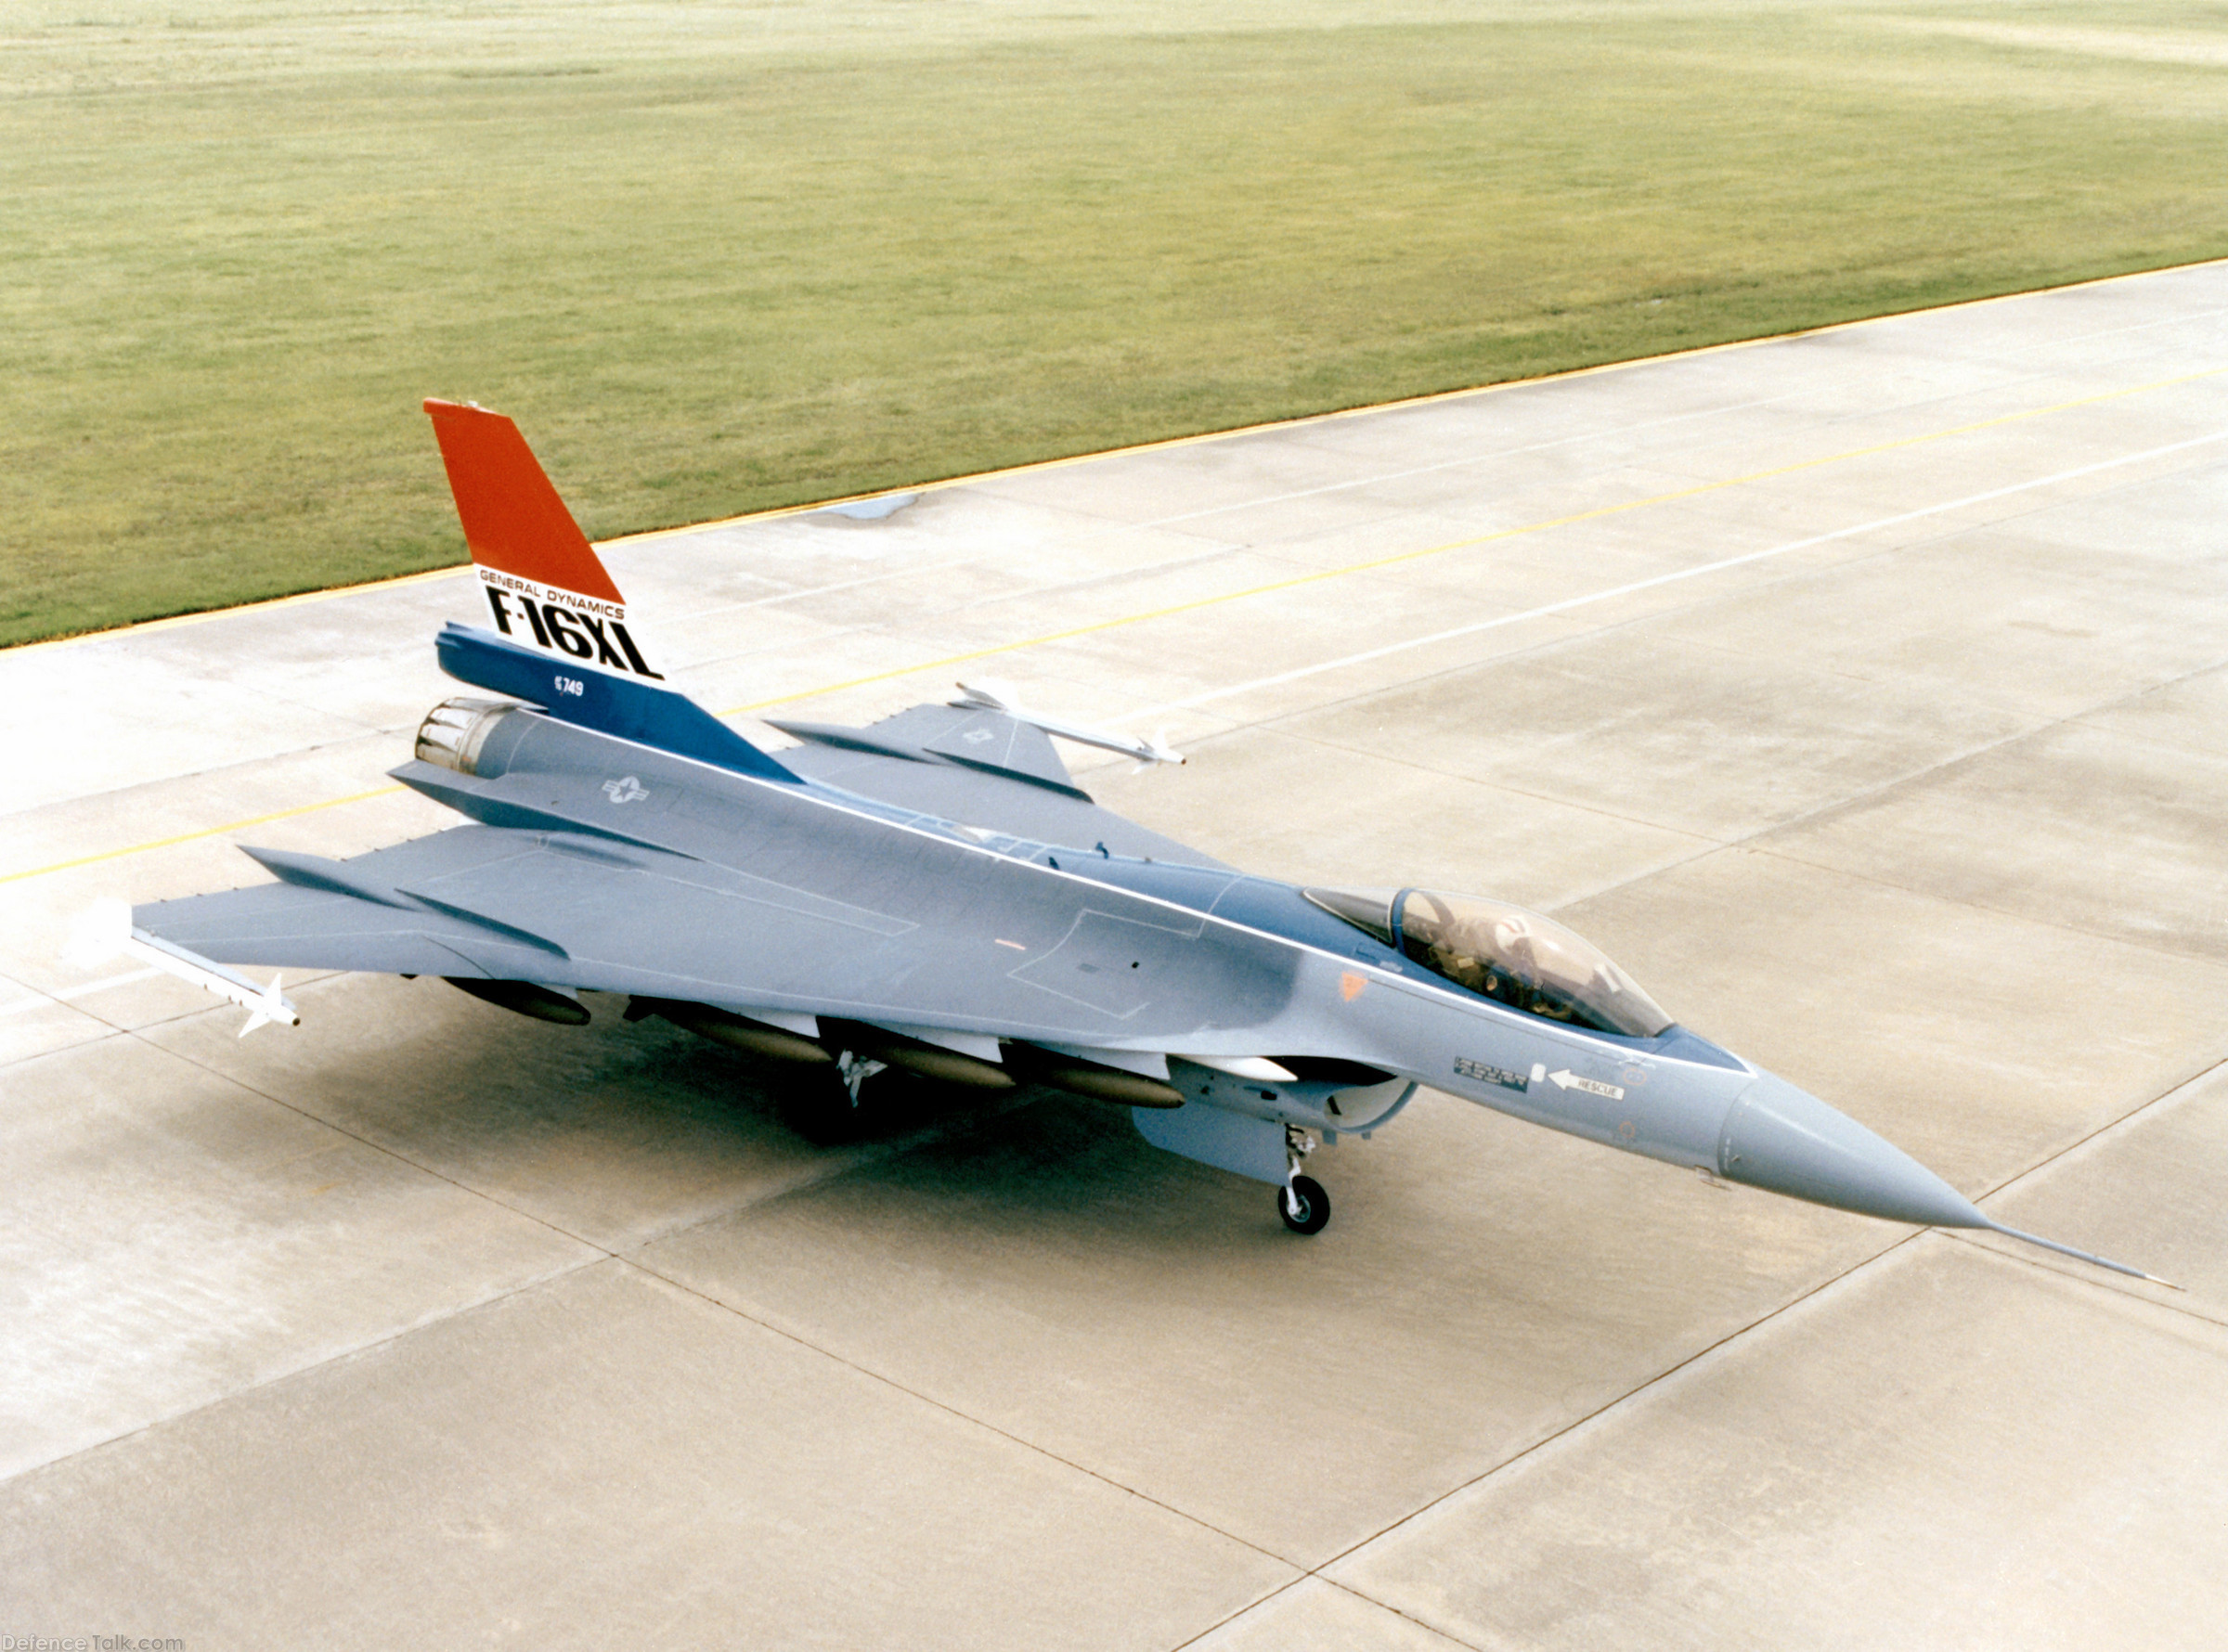 USAF F-16XL Delta Wing Test Fighter Aircraft